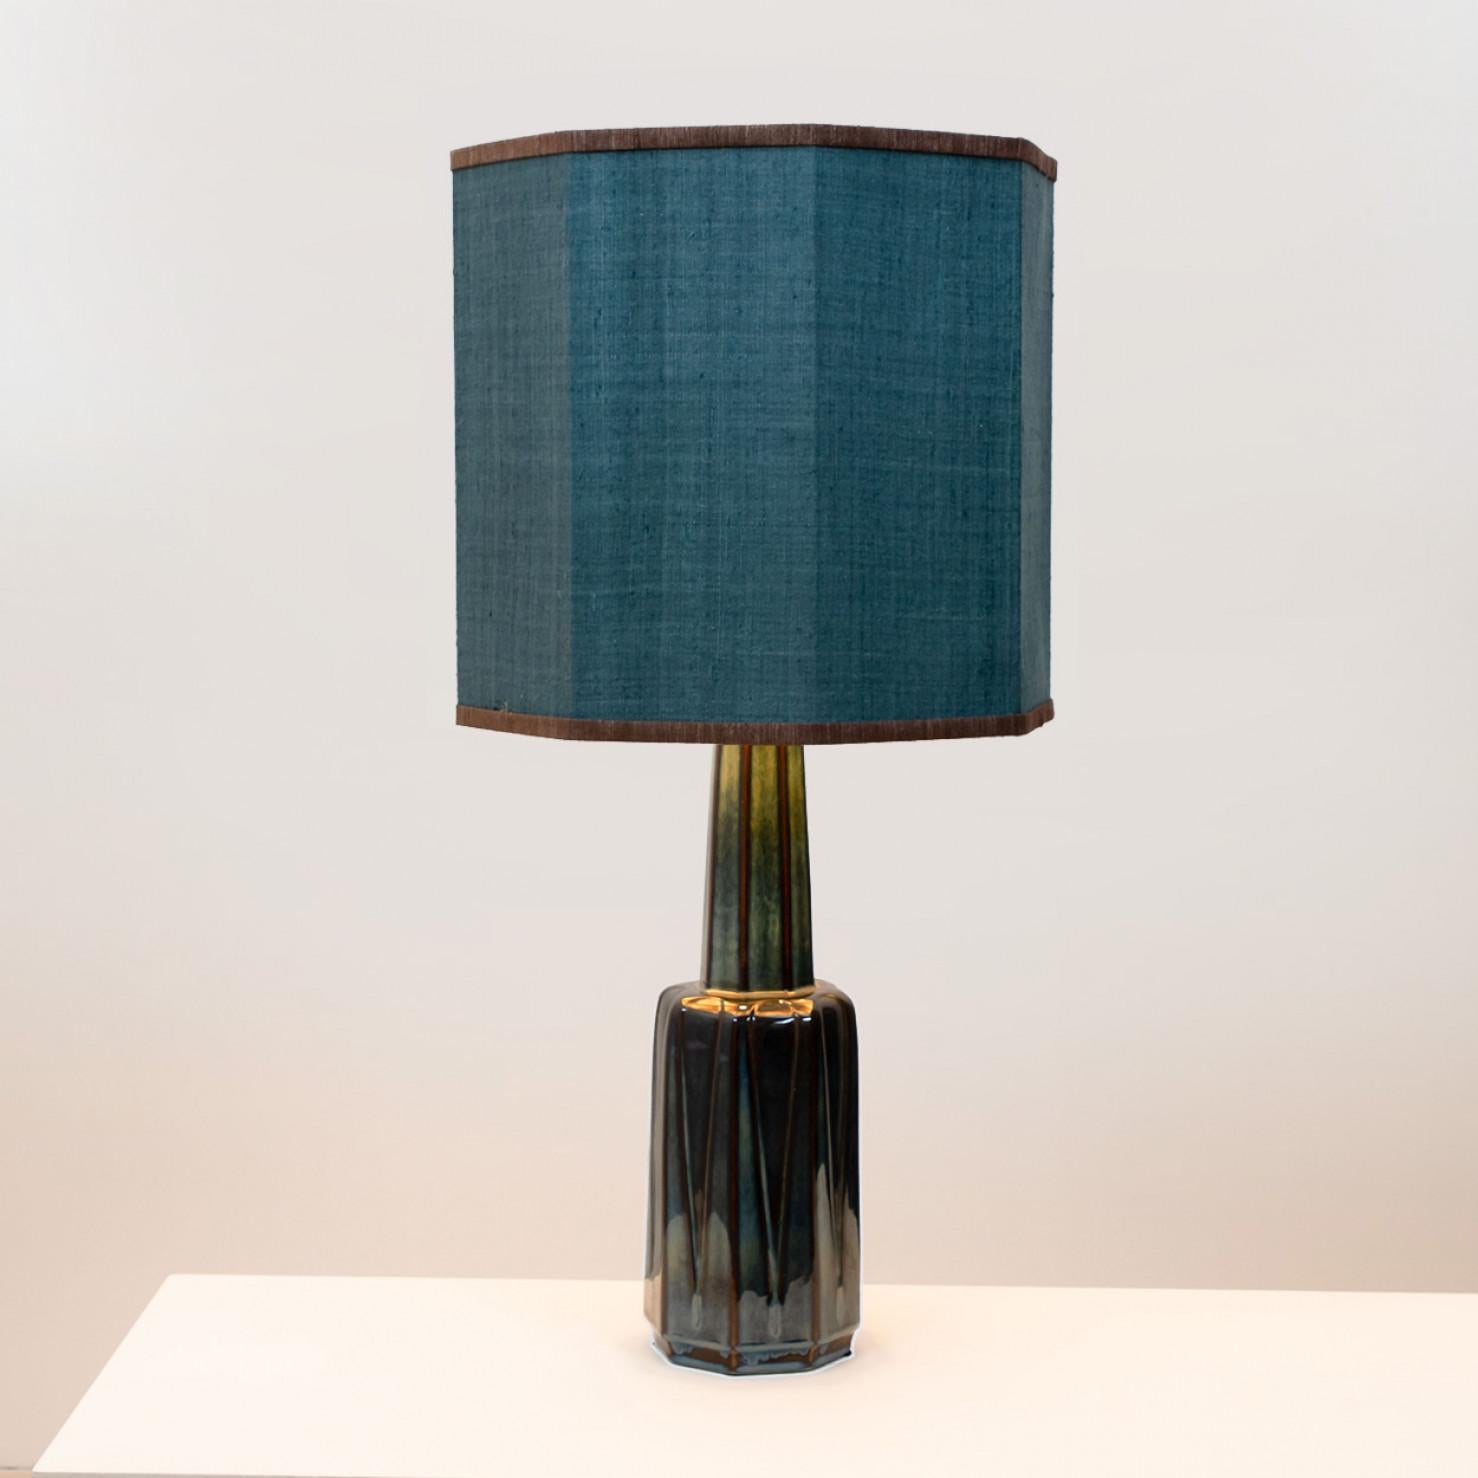 1 of the 2 Large Soholm Lamp with New Blue Silk Custom Made Lampshade Houben, 19 For Sale 1